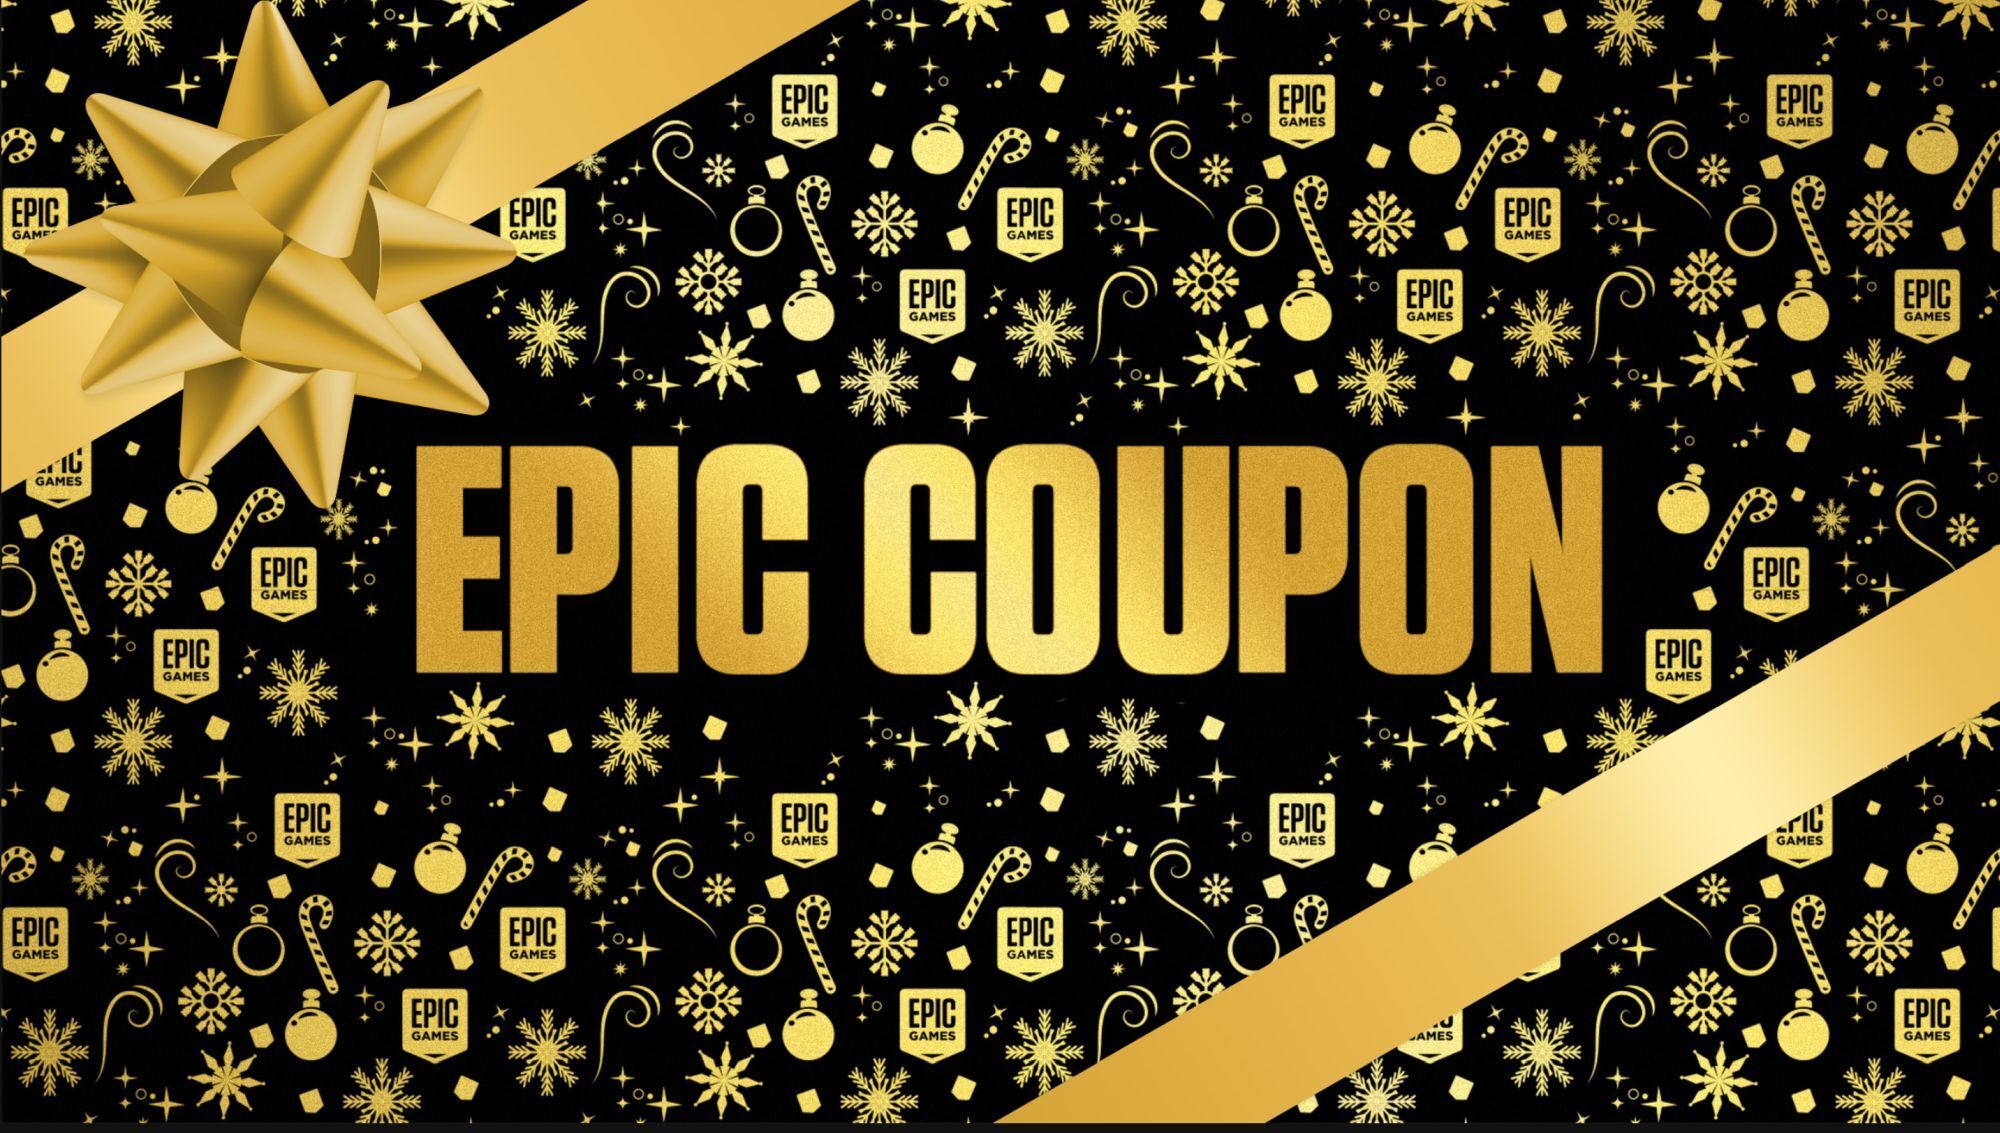 epic sports coupon code 2022